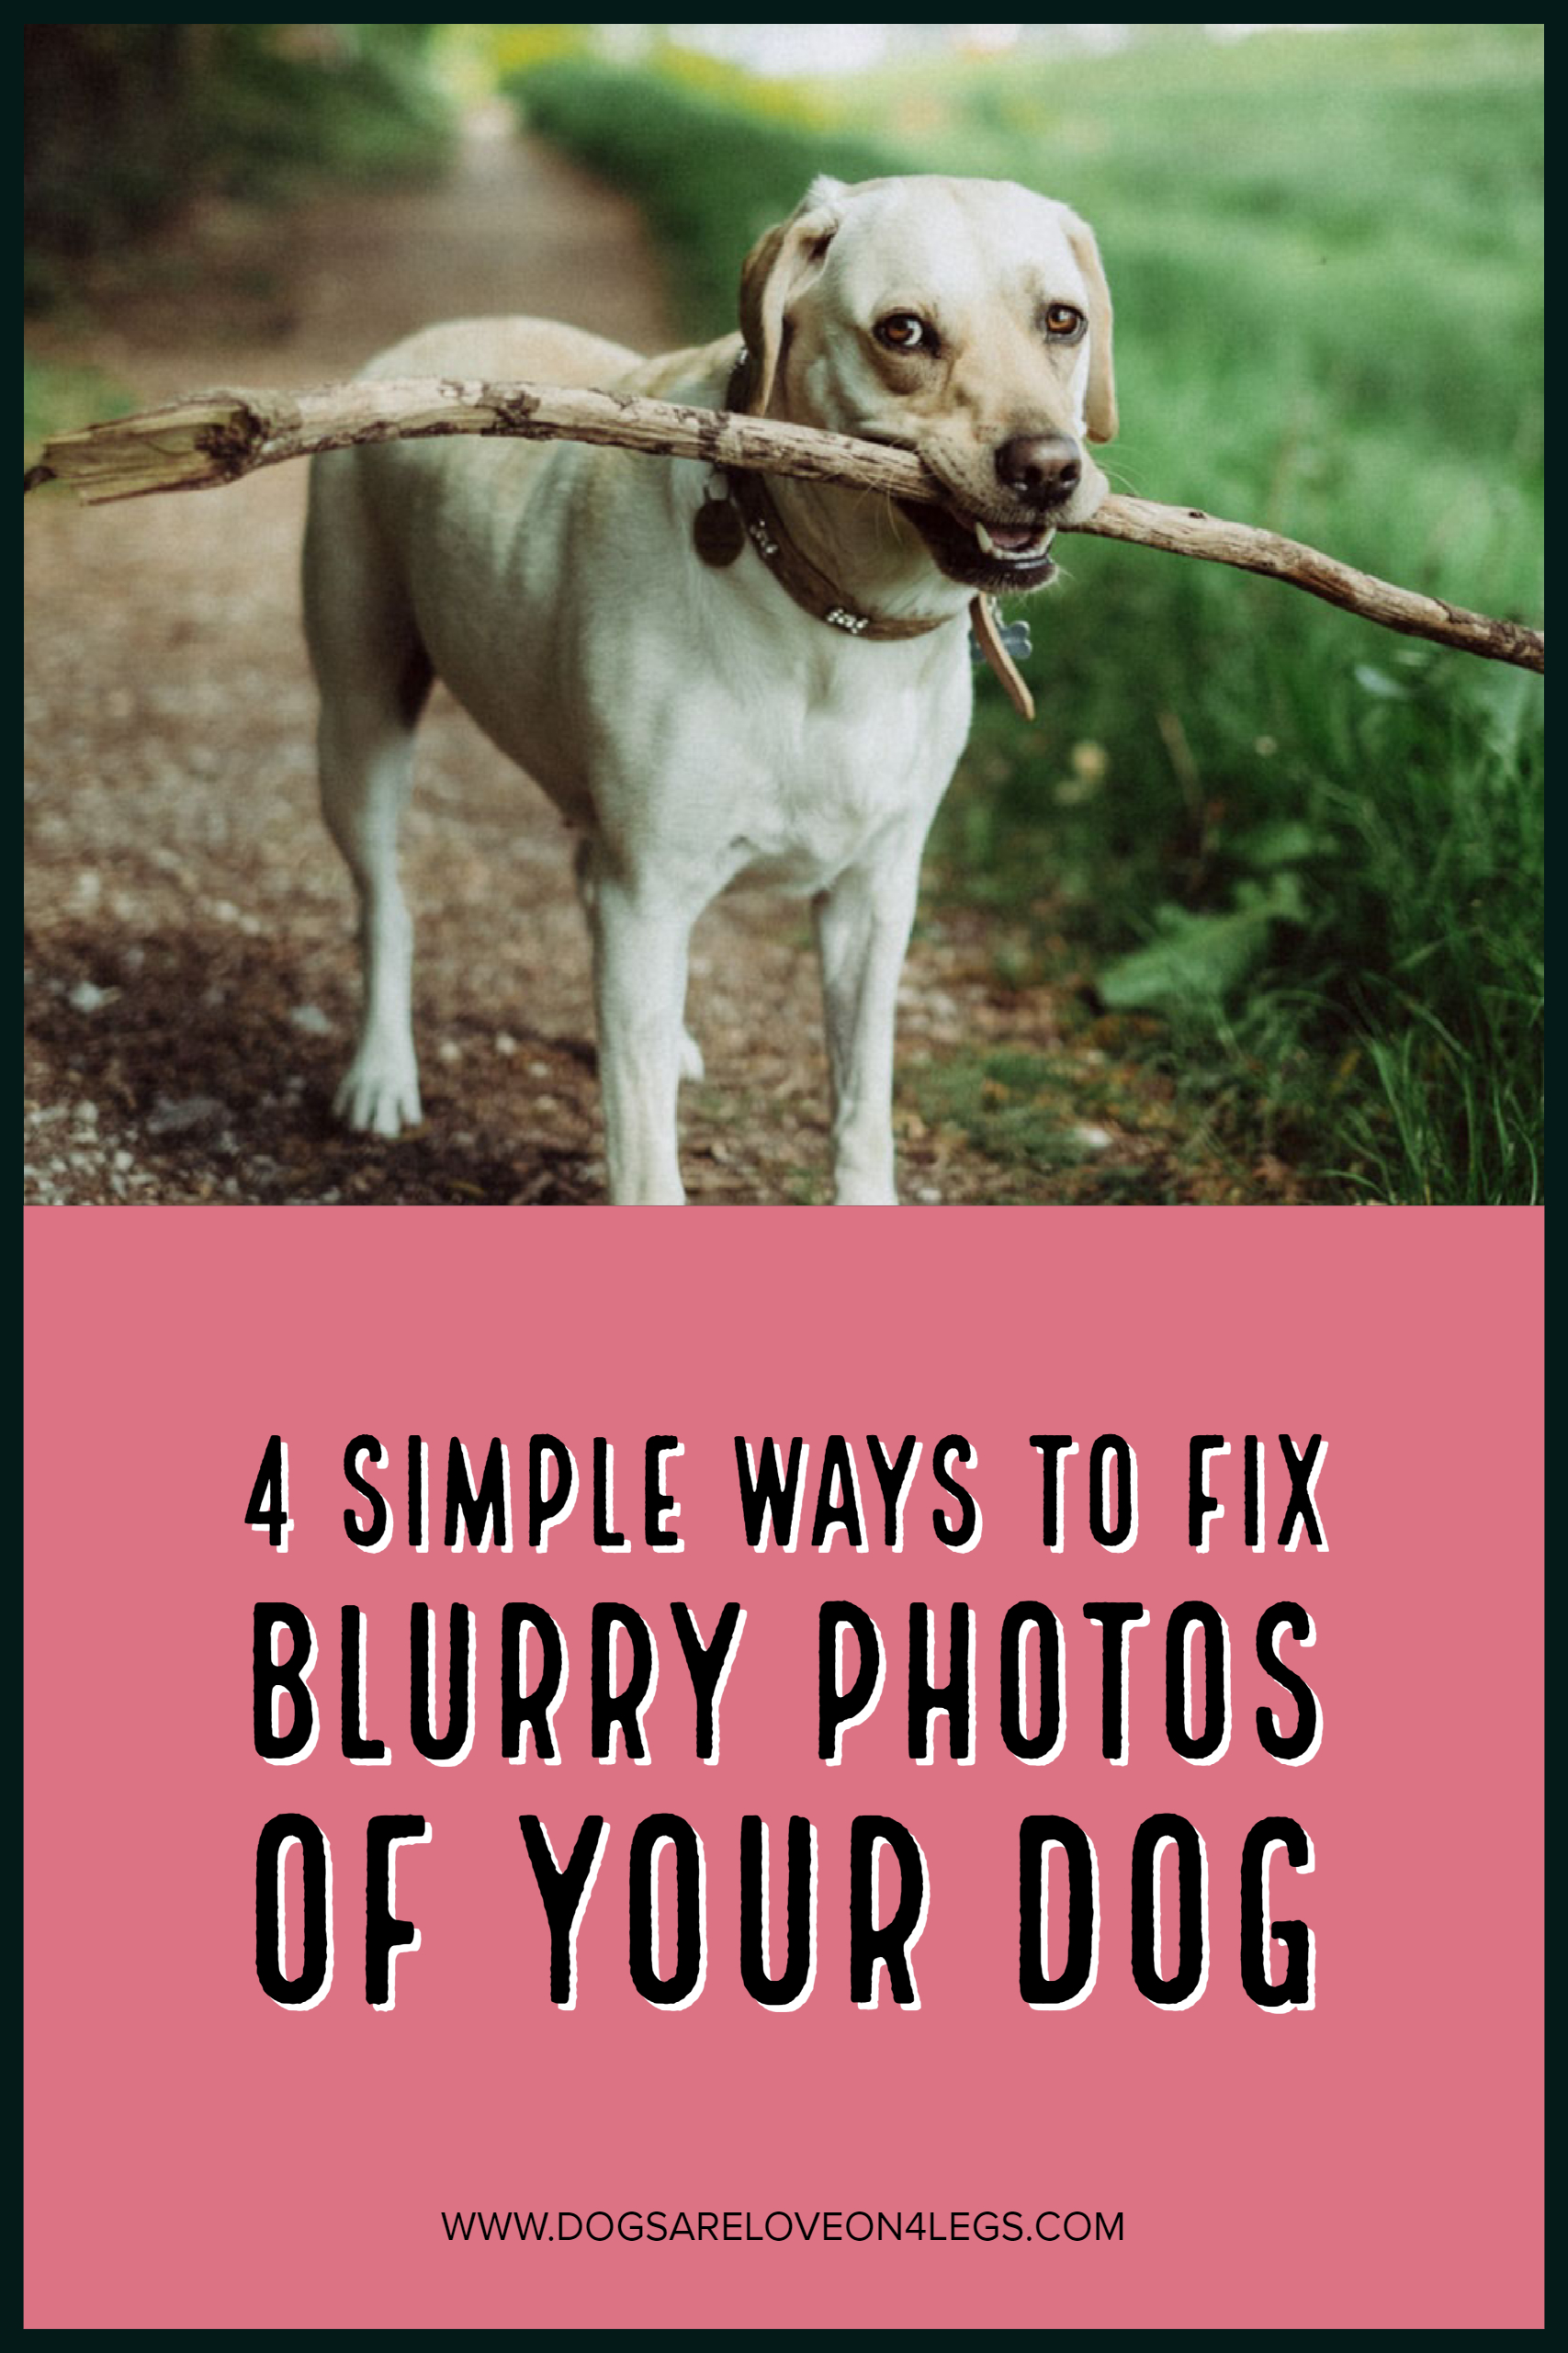 4 Simple Ways To Fix Blurry Photos Of Your Dog